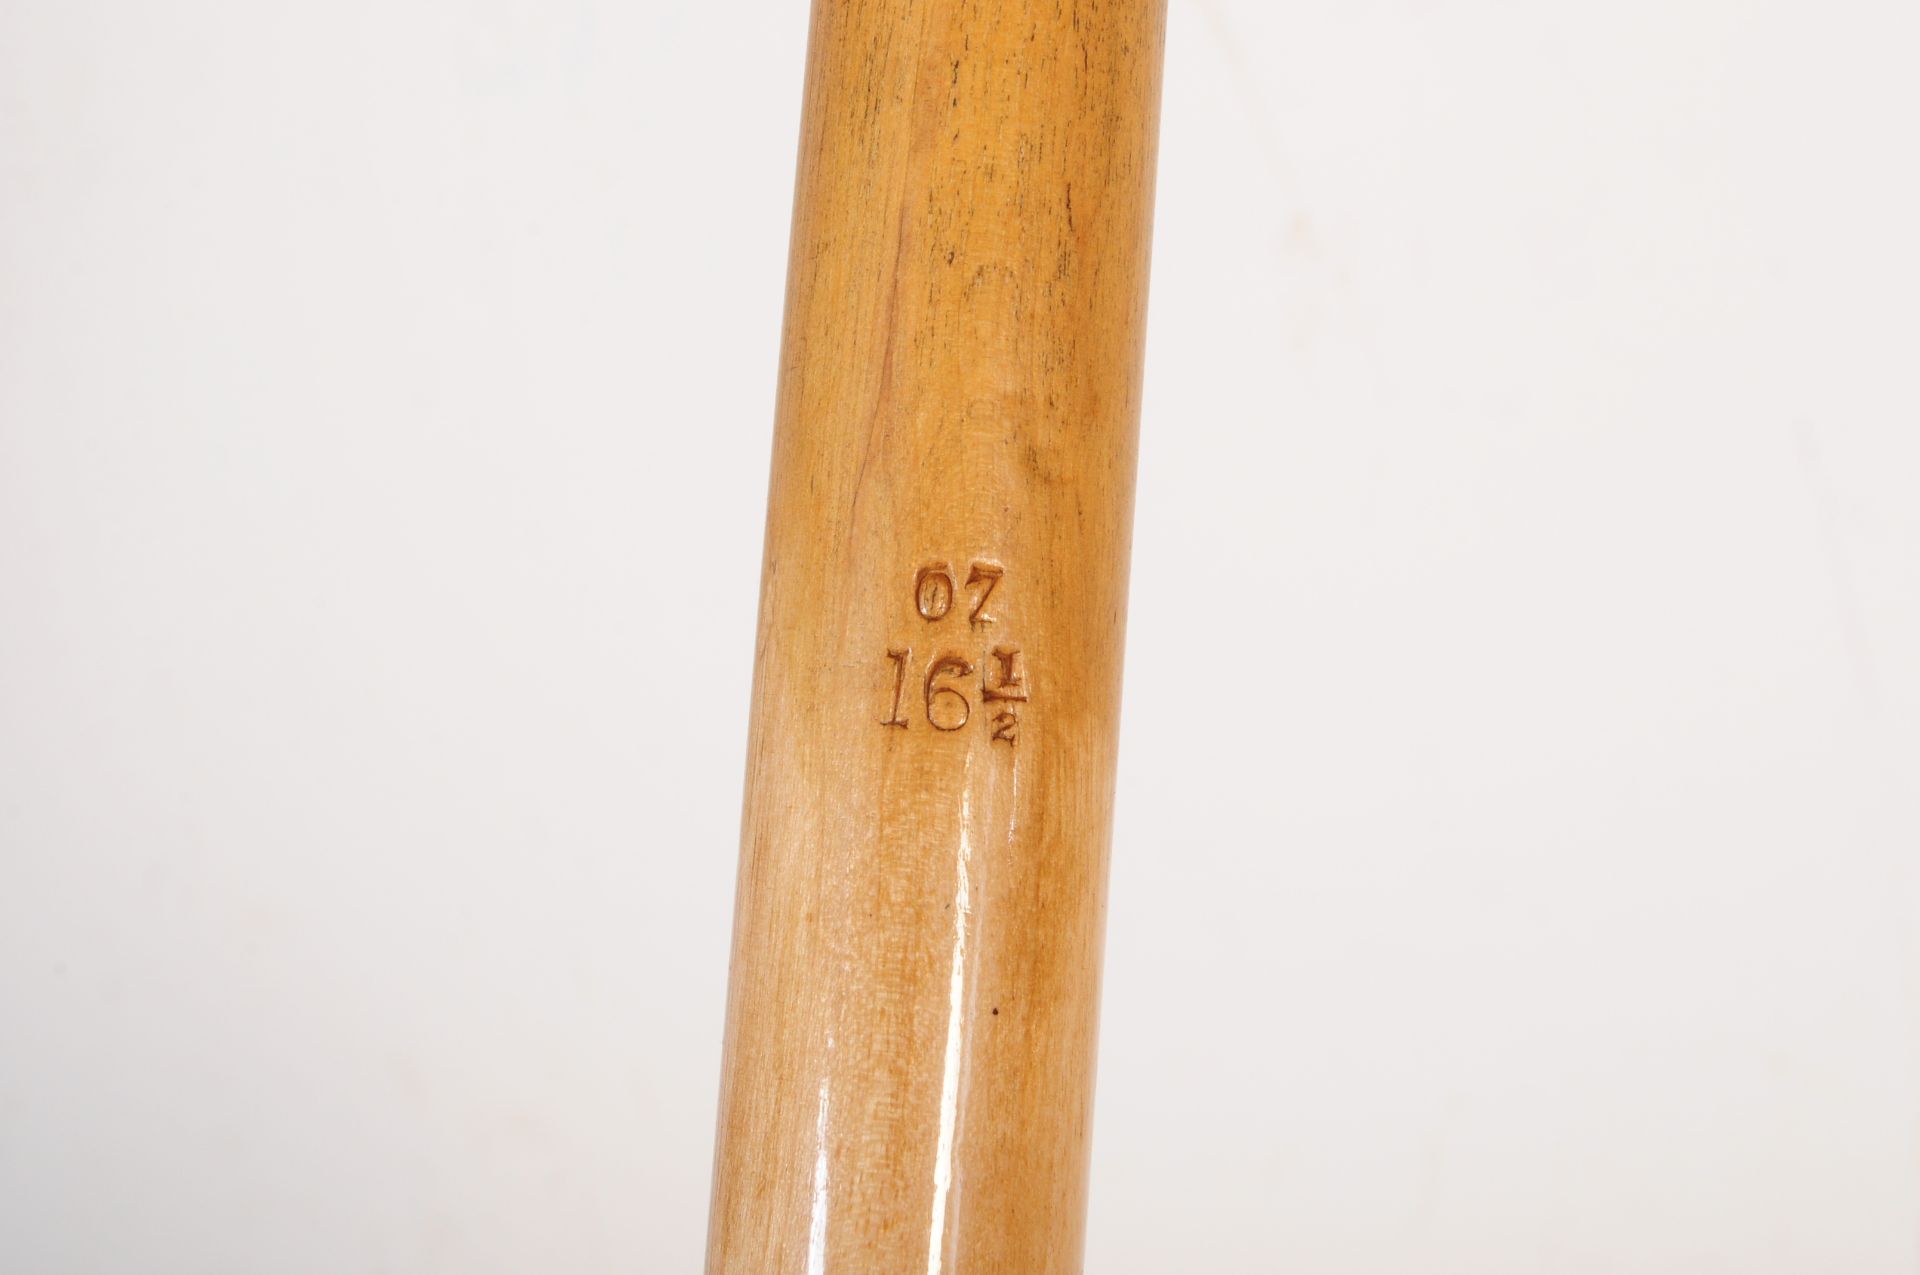 THE WALTER LINDRUM WORLD CHAPMION SNOOKER CUE - Image 5 of 6